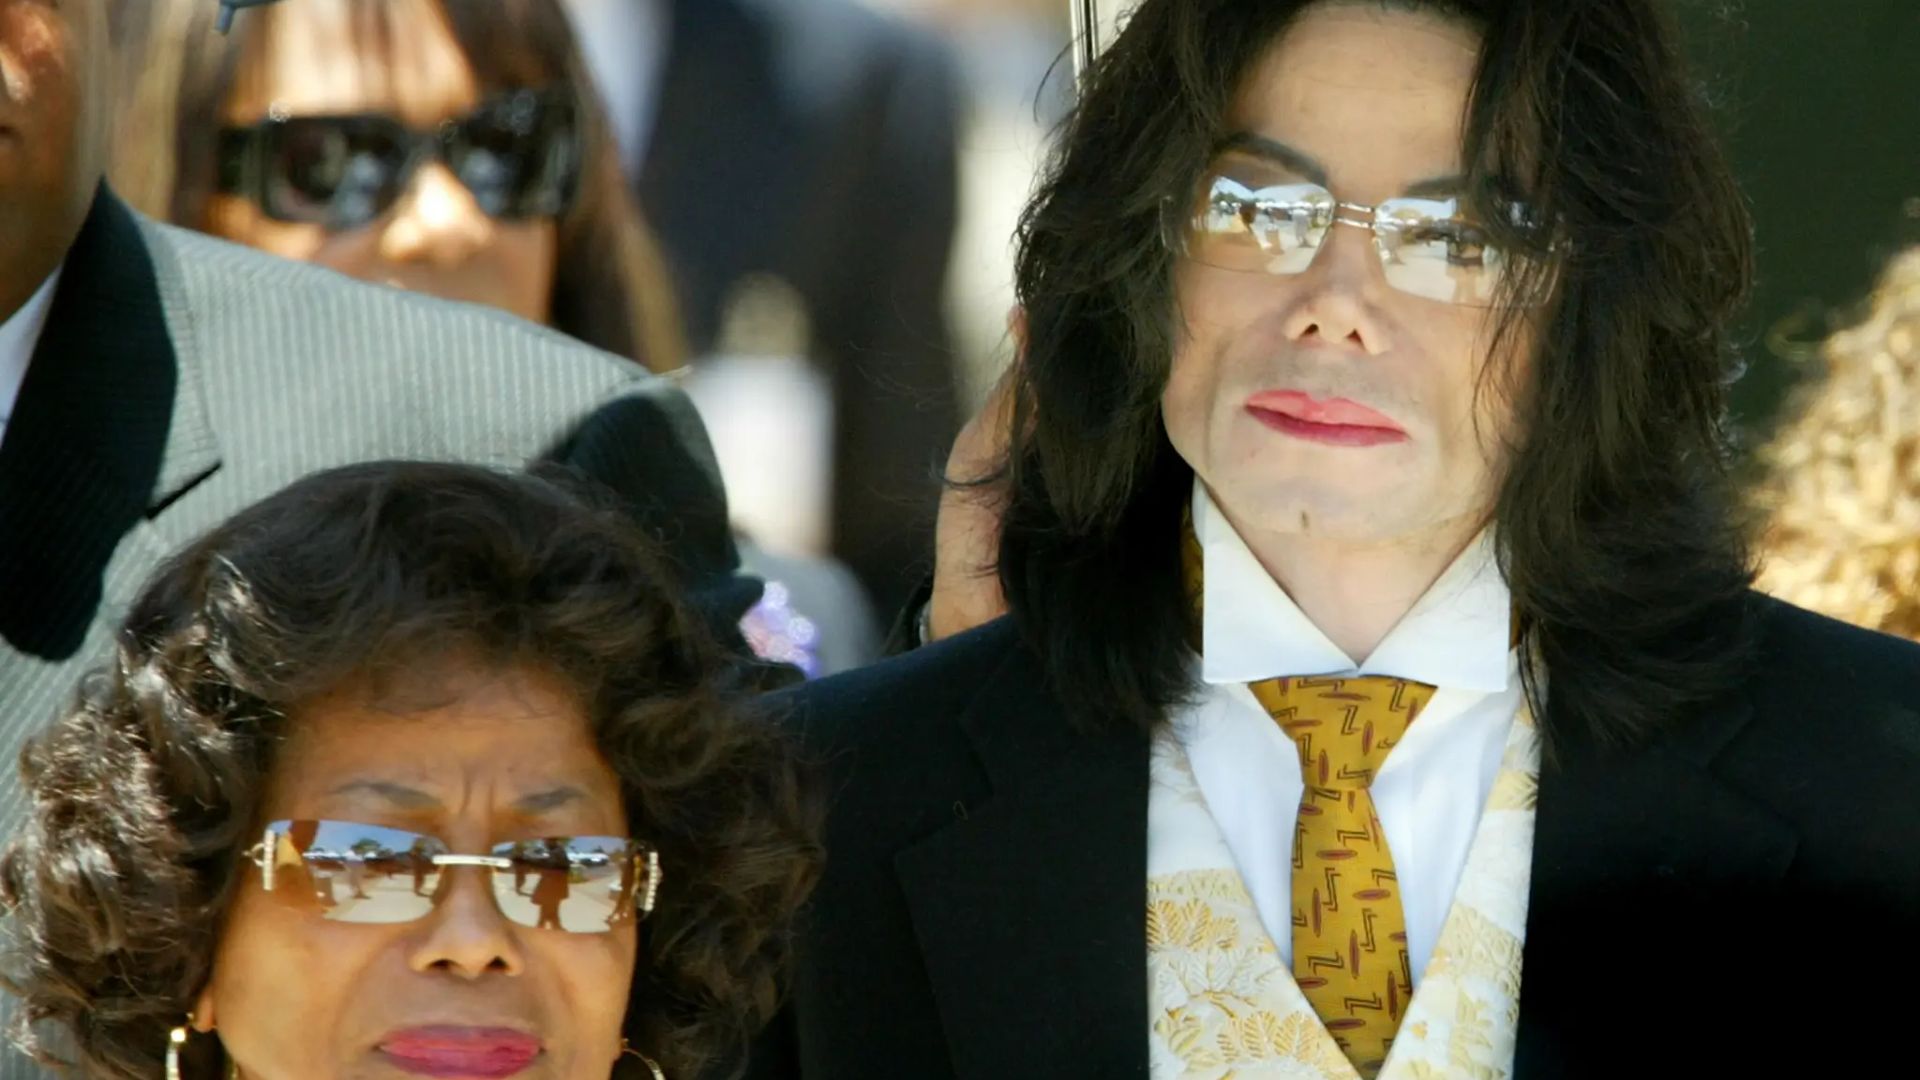 Michael Jackson’s estate claims his mom Katherine has received over $55M since his death amid battle with grandson Bigi